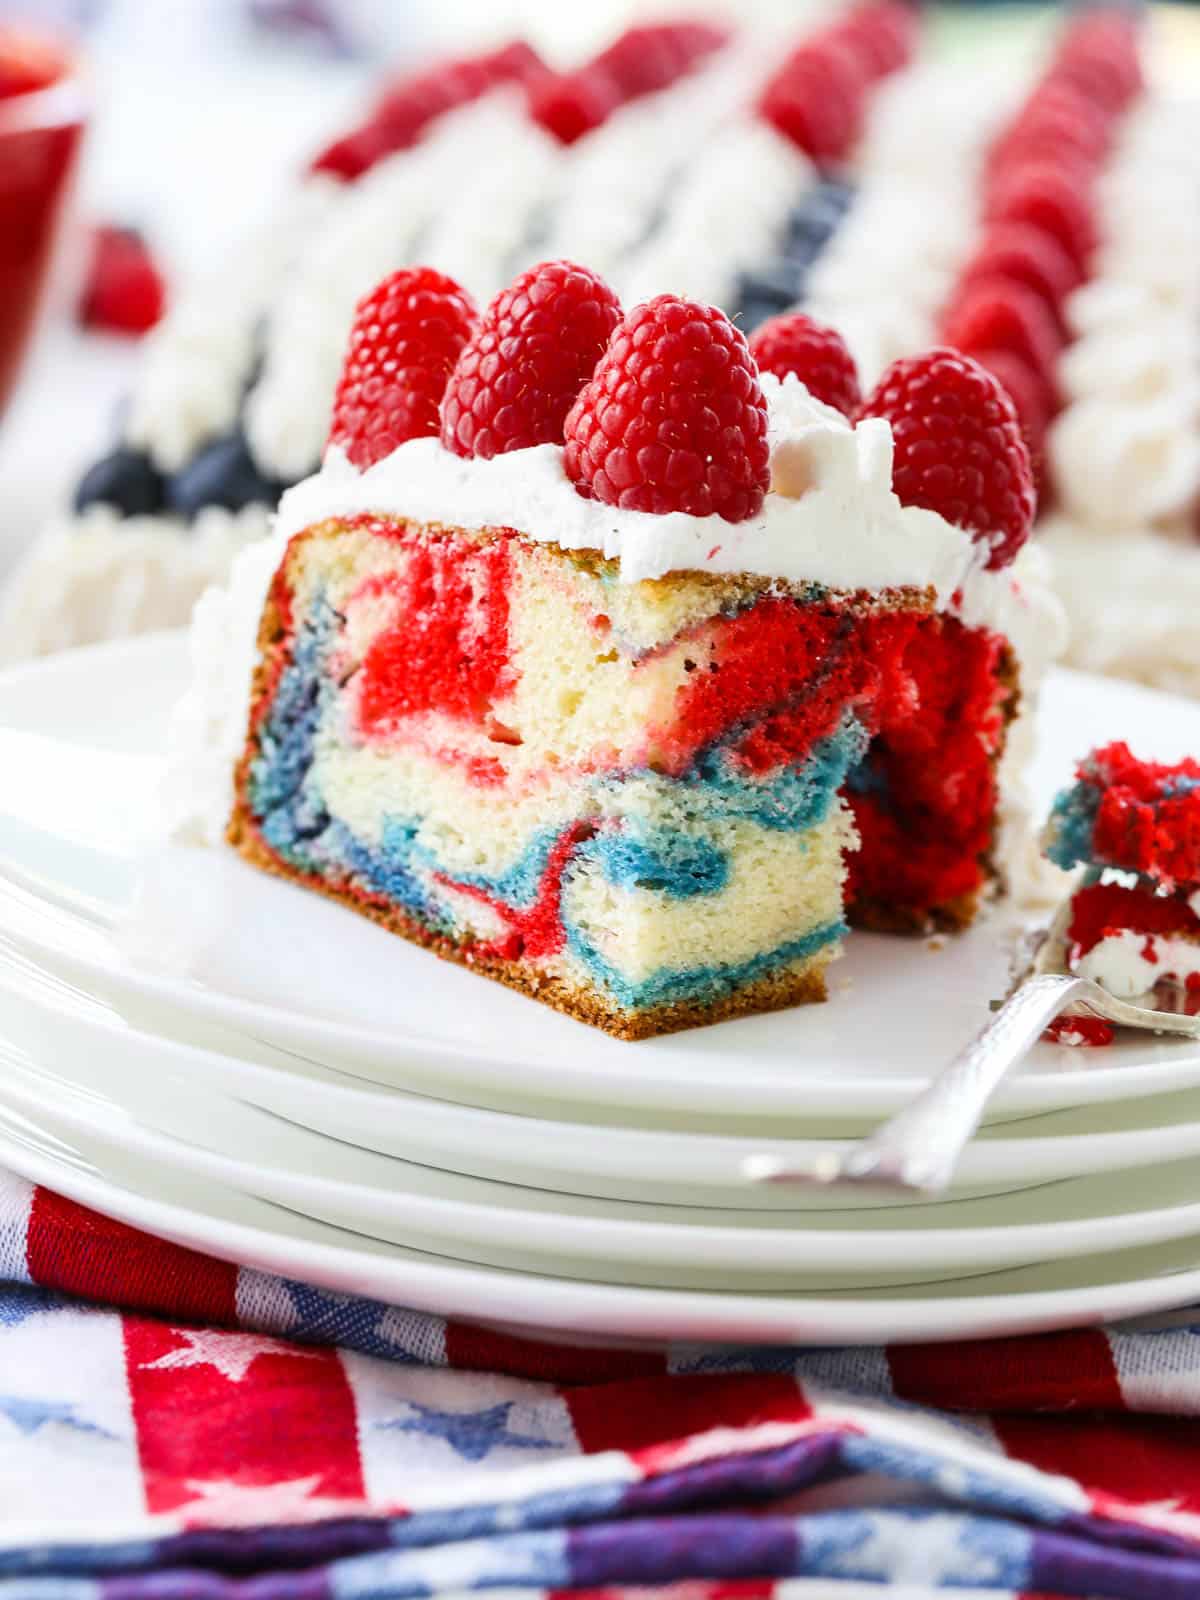 A slice of red, white and blue cake topped with white frosting and red berries. 